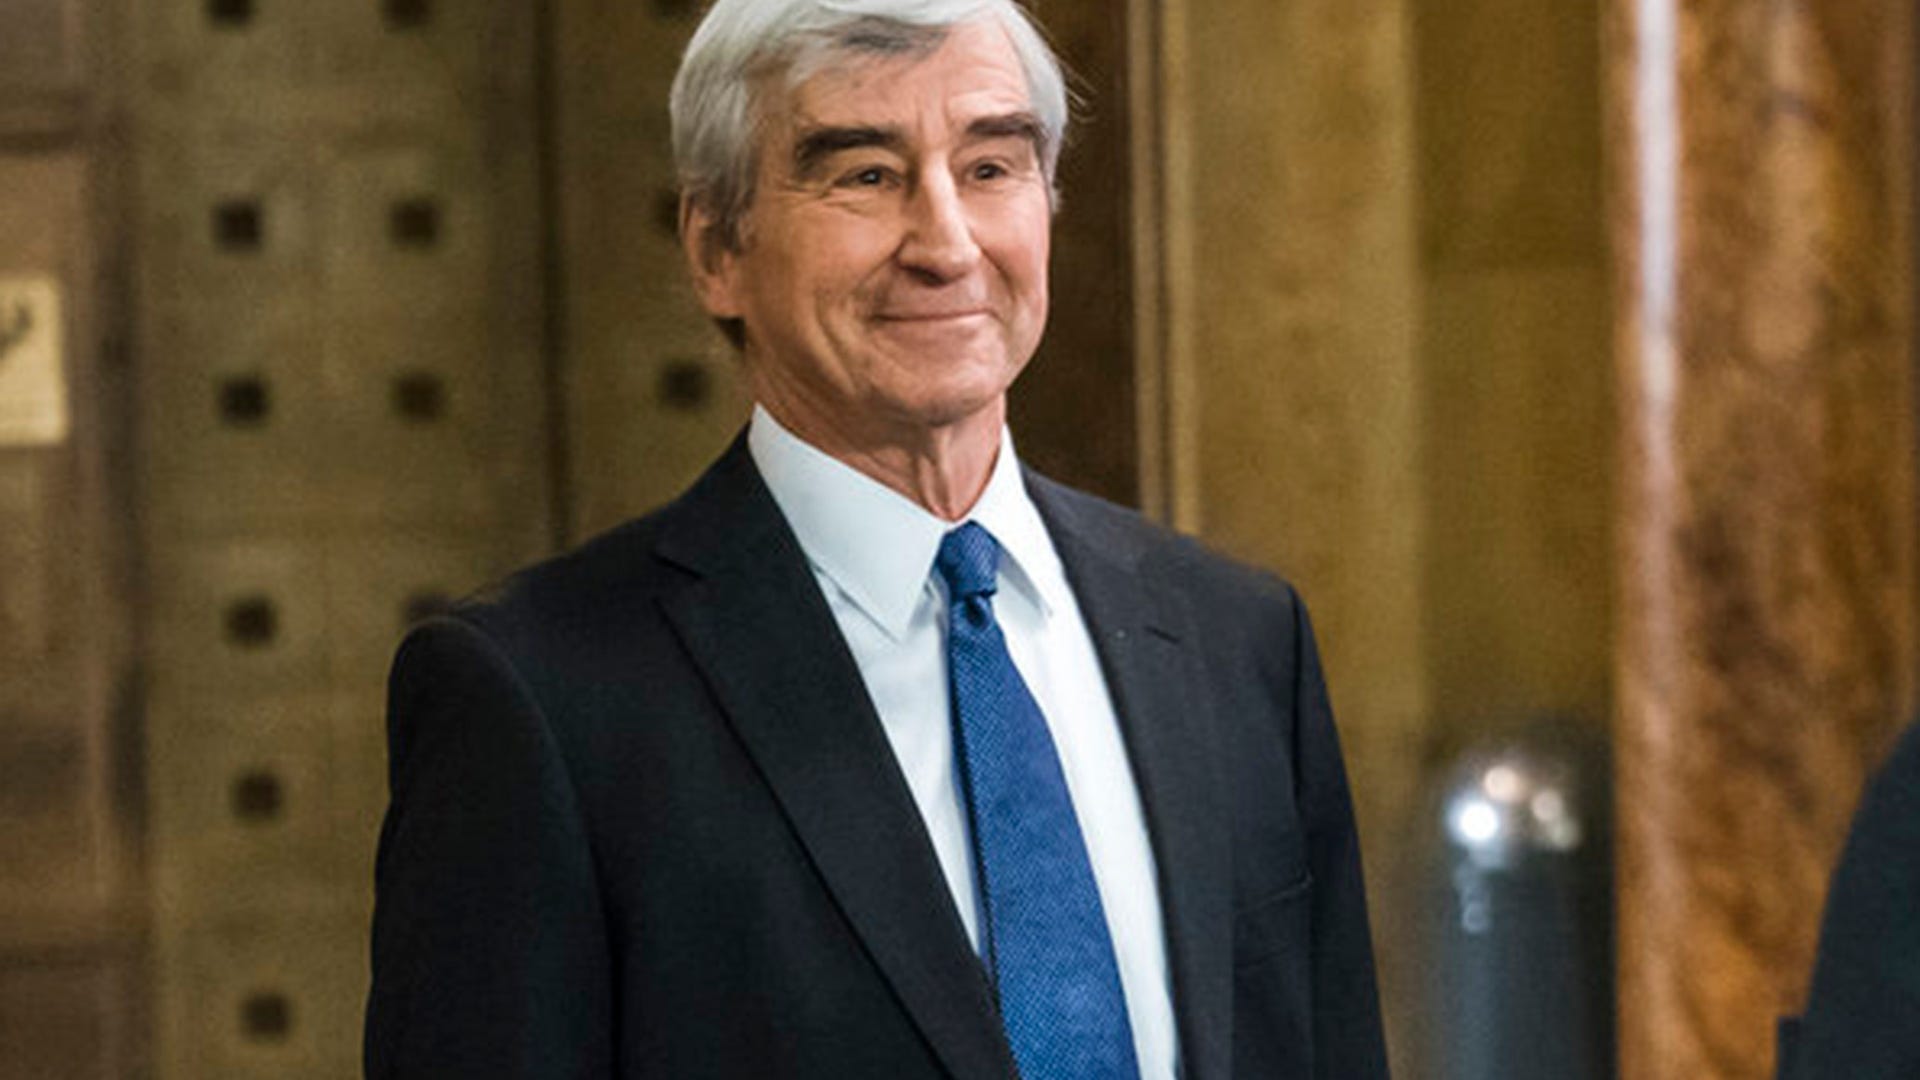 Sam Waterston, Law & Order: Special Victims Unit